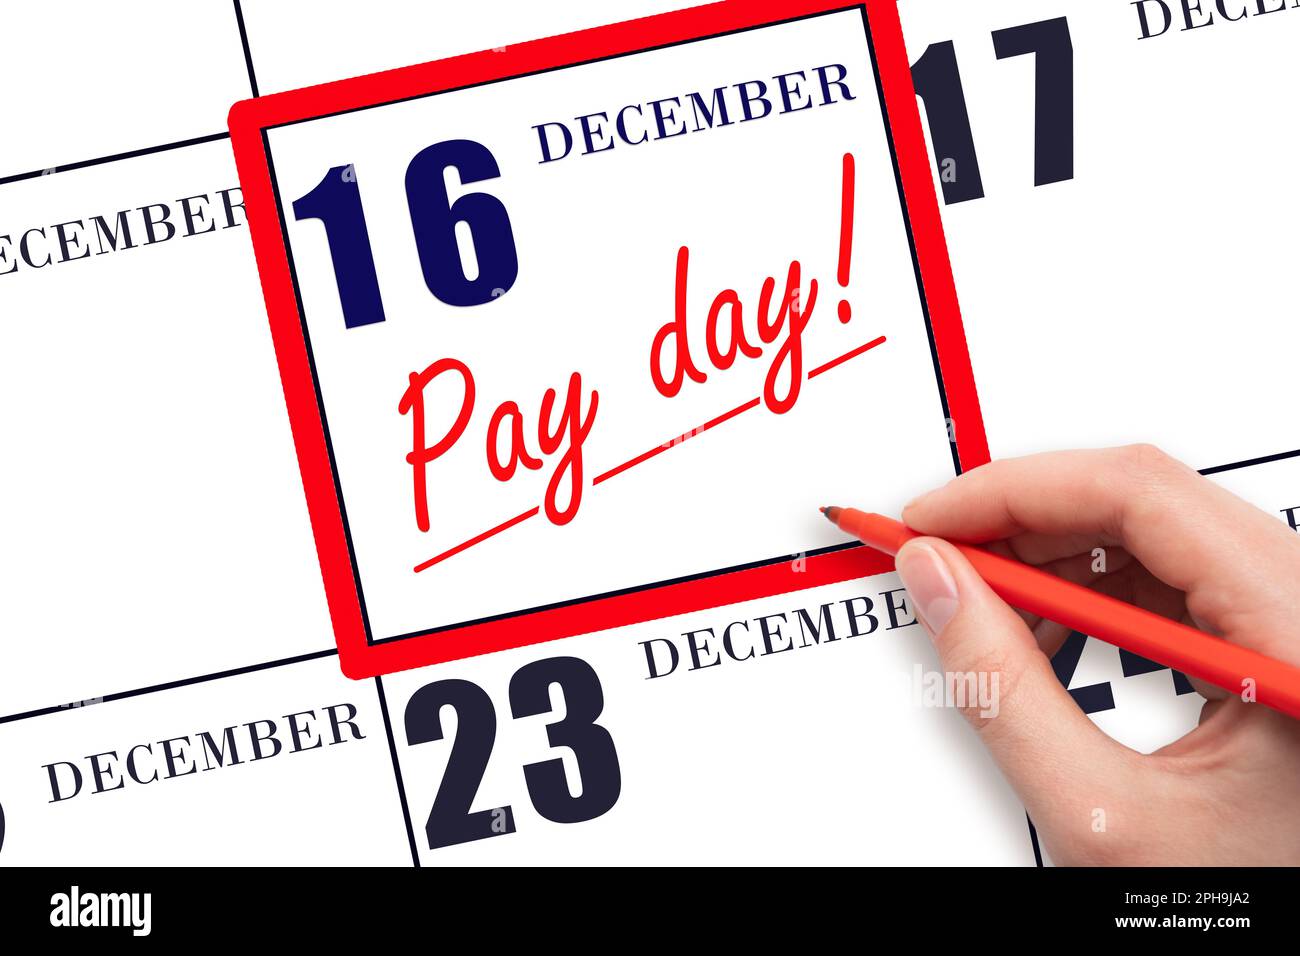 16th day of December. Hand writing text PAY DATE on calendar date December 16 and underline it. Payment due date.  Reminder concept of payment. Winter Stock Photo